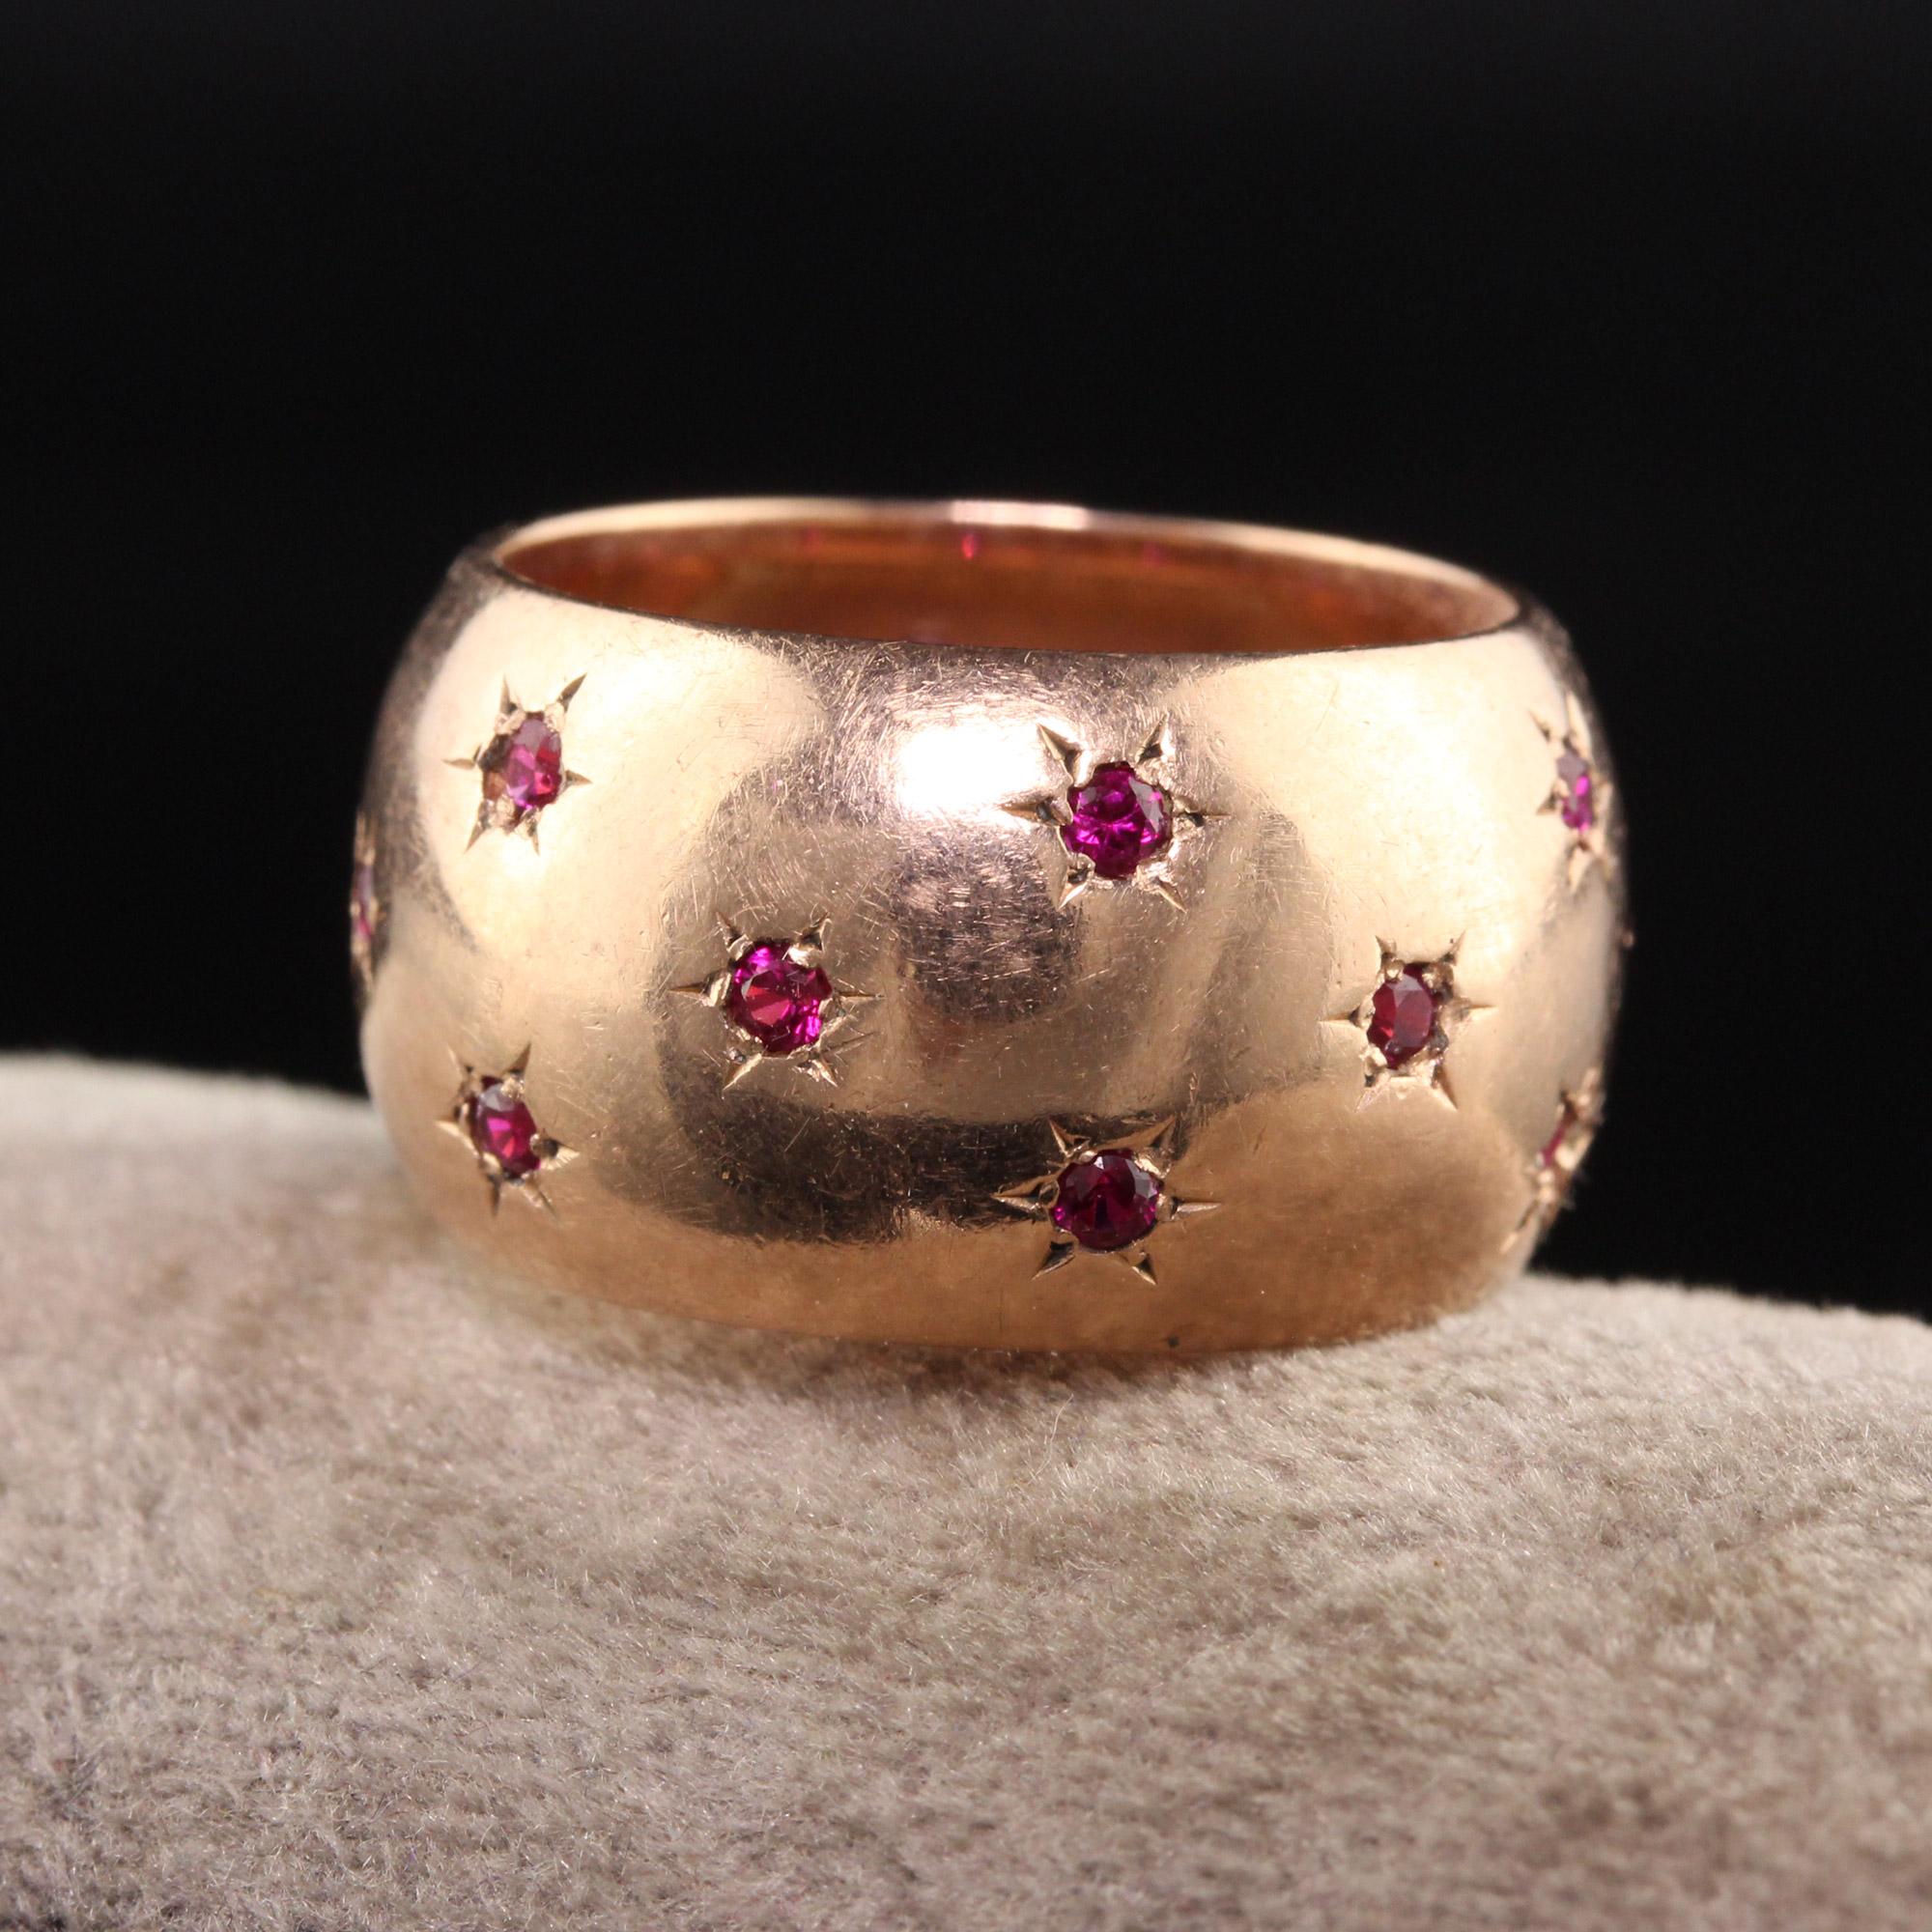 Beautiful Vintage Estate 14K Rose Gold Ruby Star Pattern Wide Wedding Band. This beautiful wedding band features natural rubies in a star setting going around the entire ring. It is crafted in 14K rose gold.

Item #R1156

Metal: 14K Rose